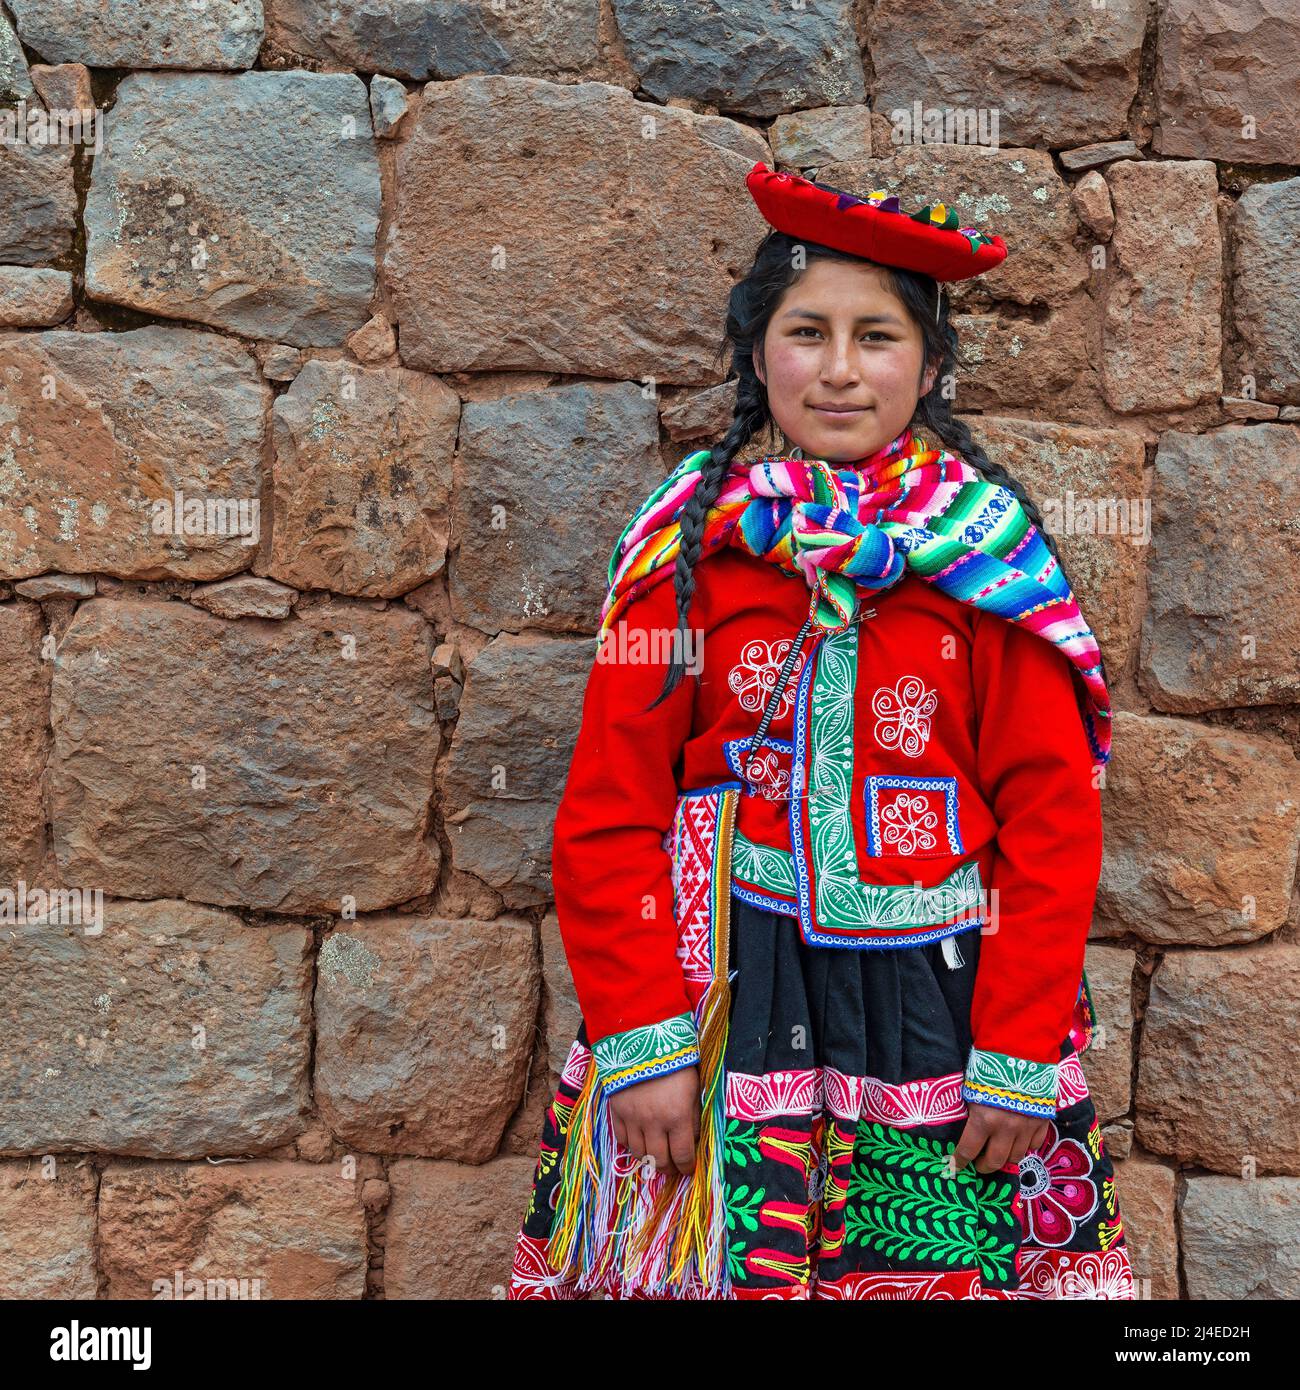 Portrait of young Peruvian indigenous Quechua woman with traditional textile clothing in front of Inca wall in Cusco, Sacred Valley of the Inca, Peru. Stock Photo